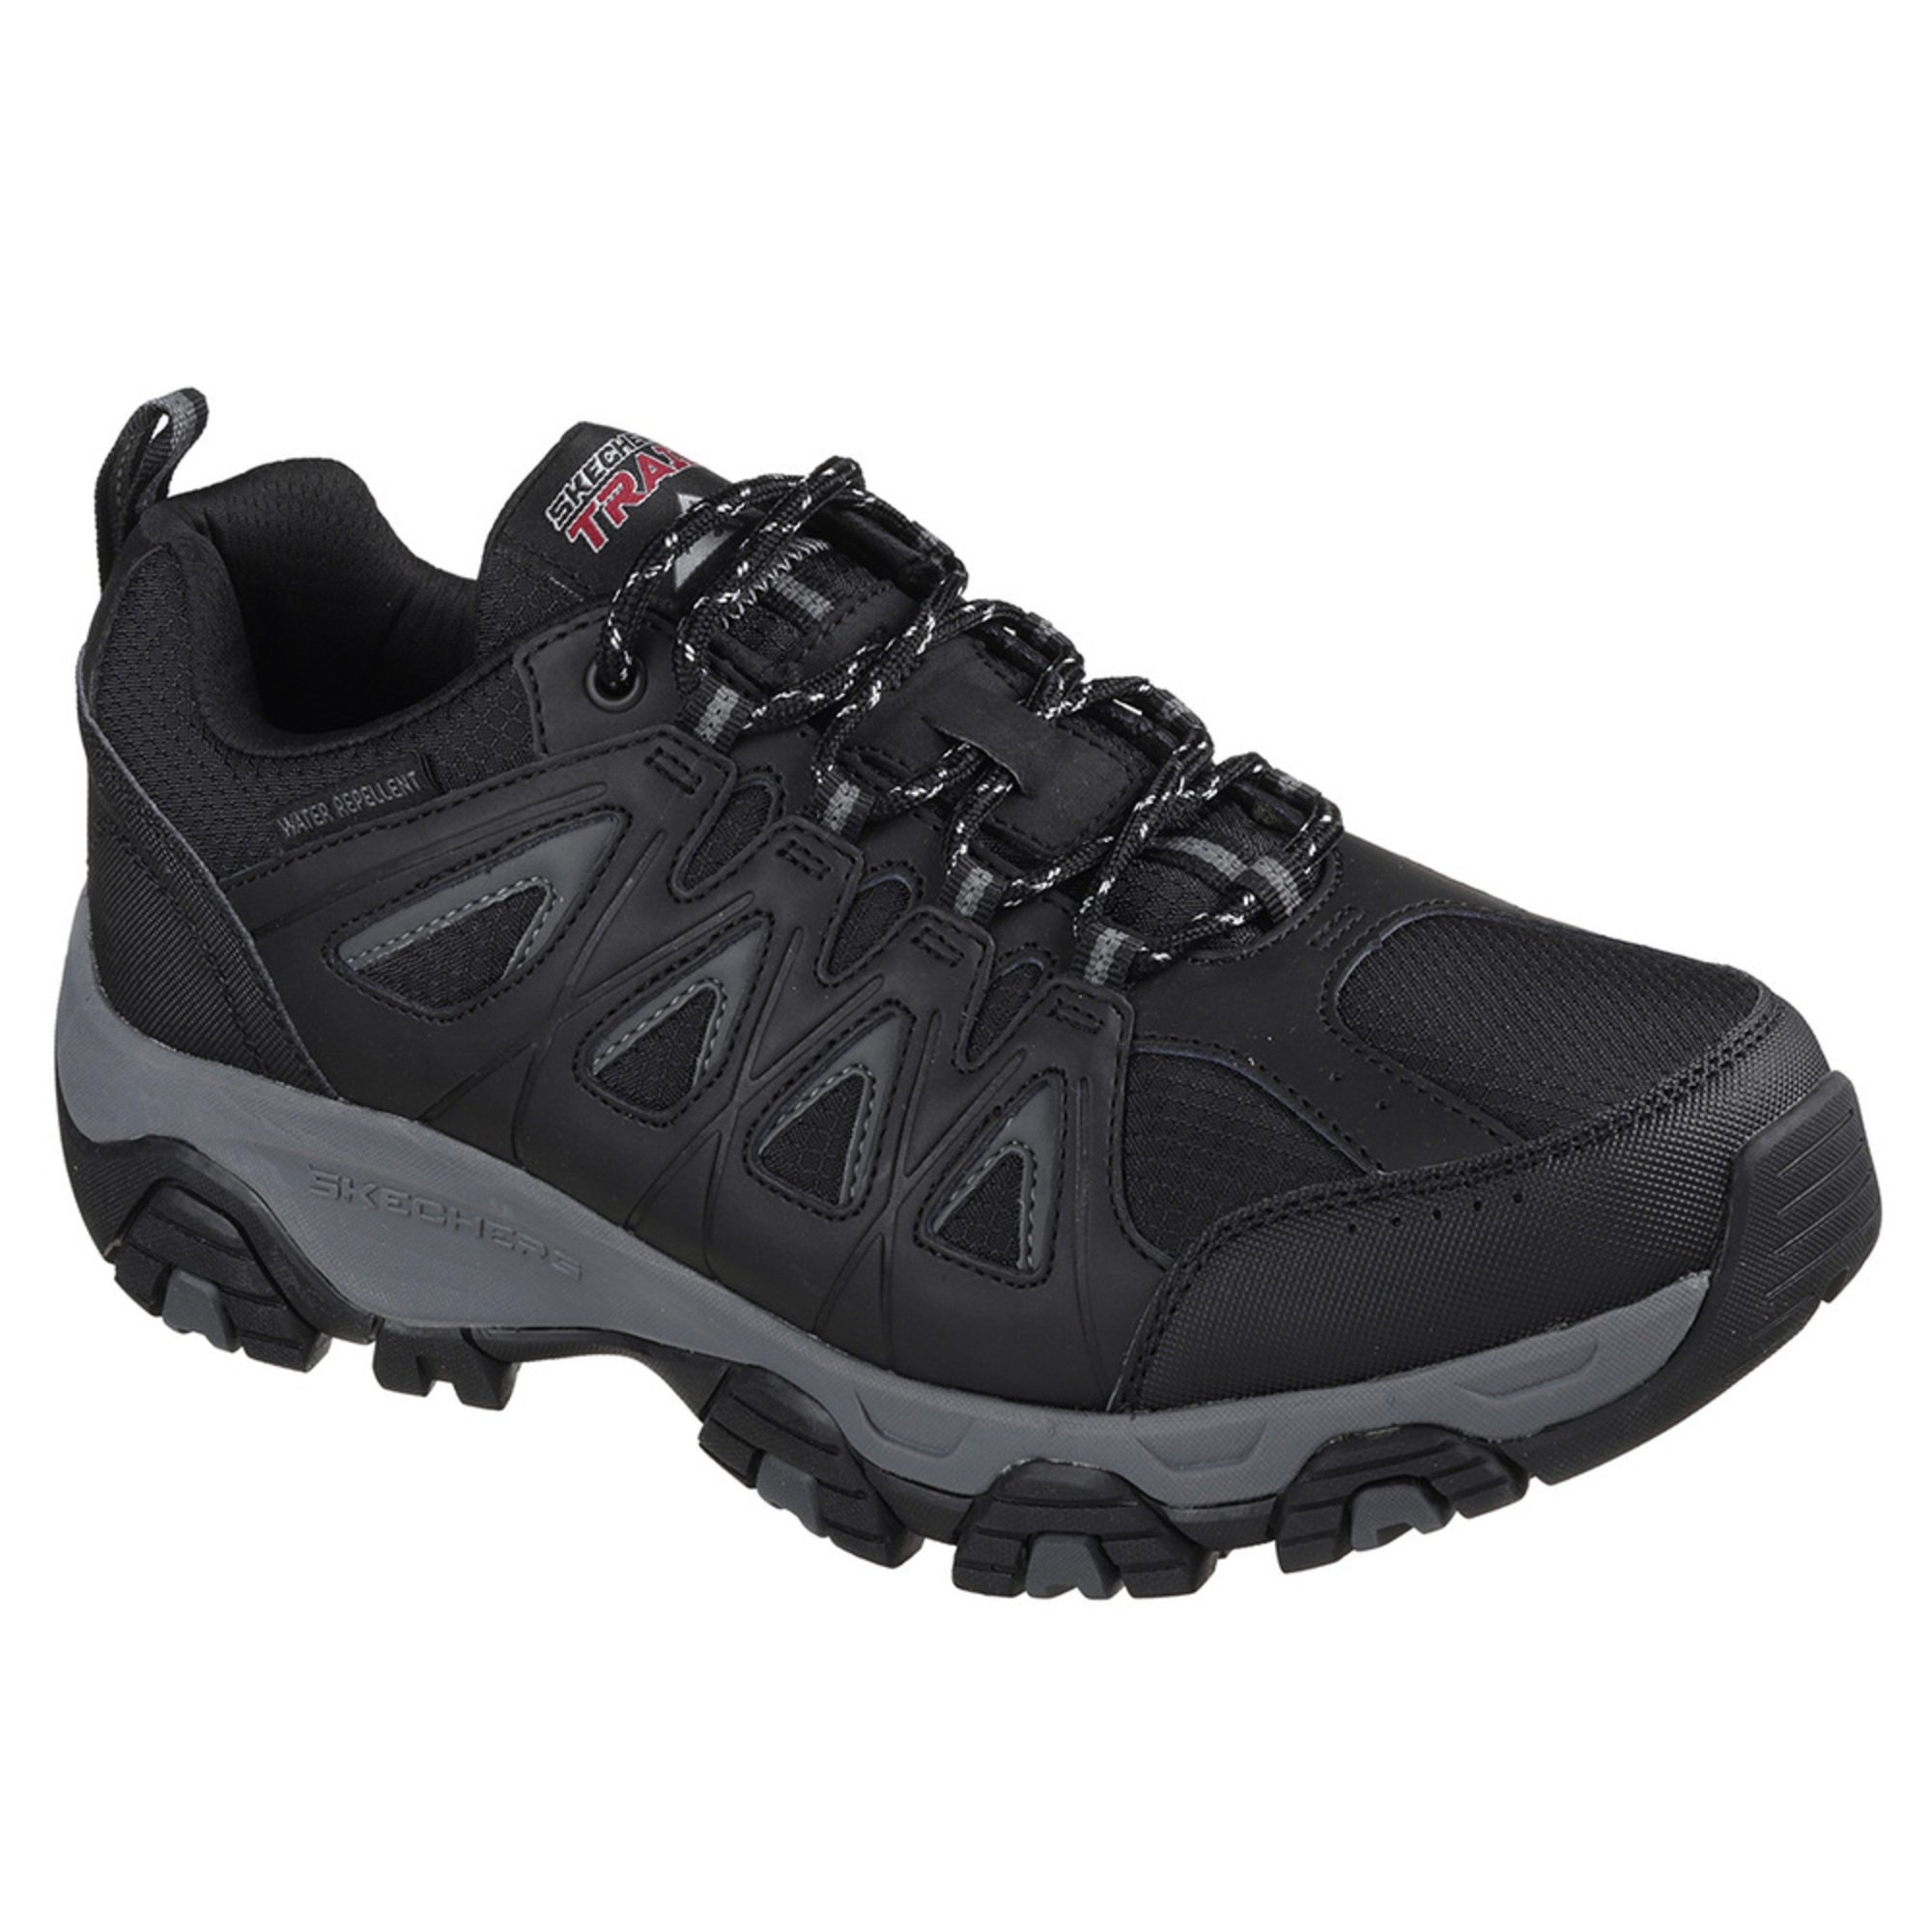 skechers trail shoes Sale,up to 76 